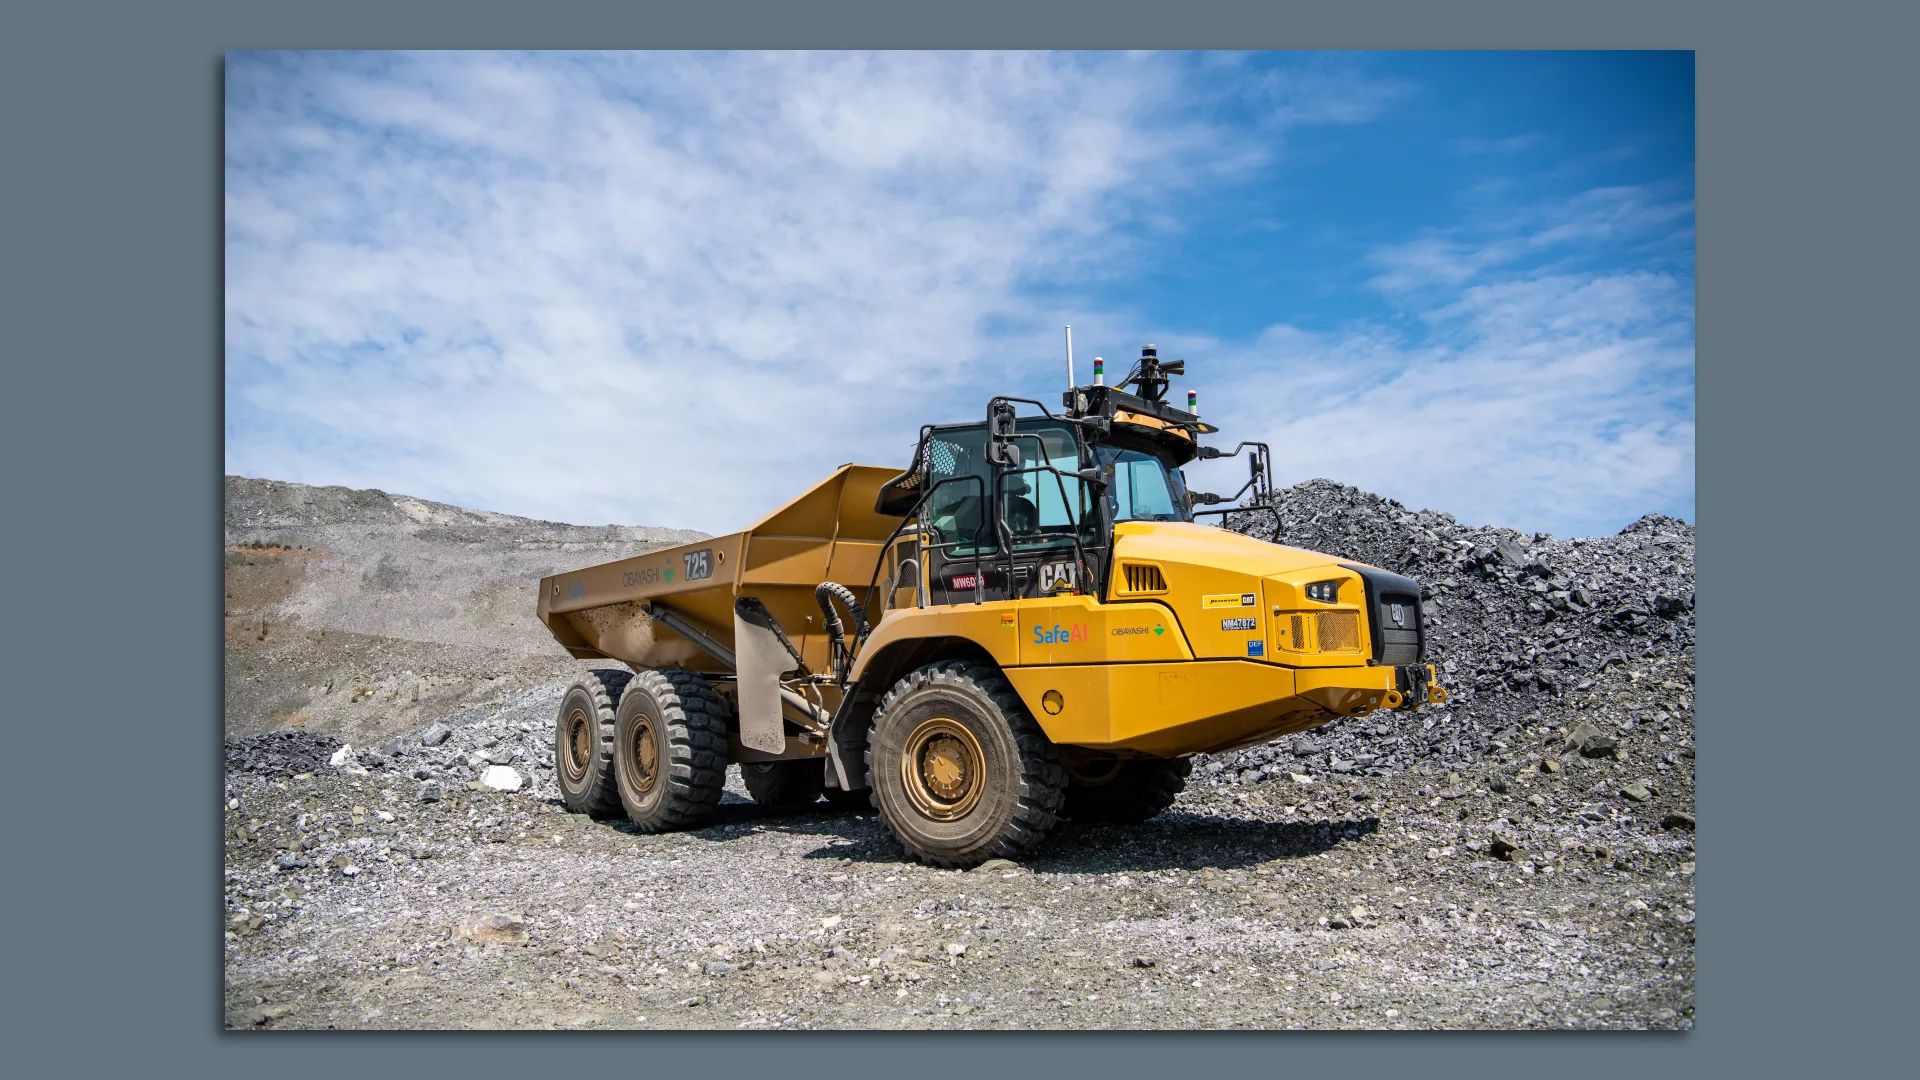 Photo of a heavy duty mining vehicle at an extraction site.